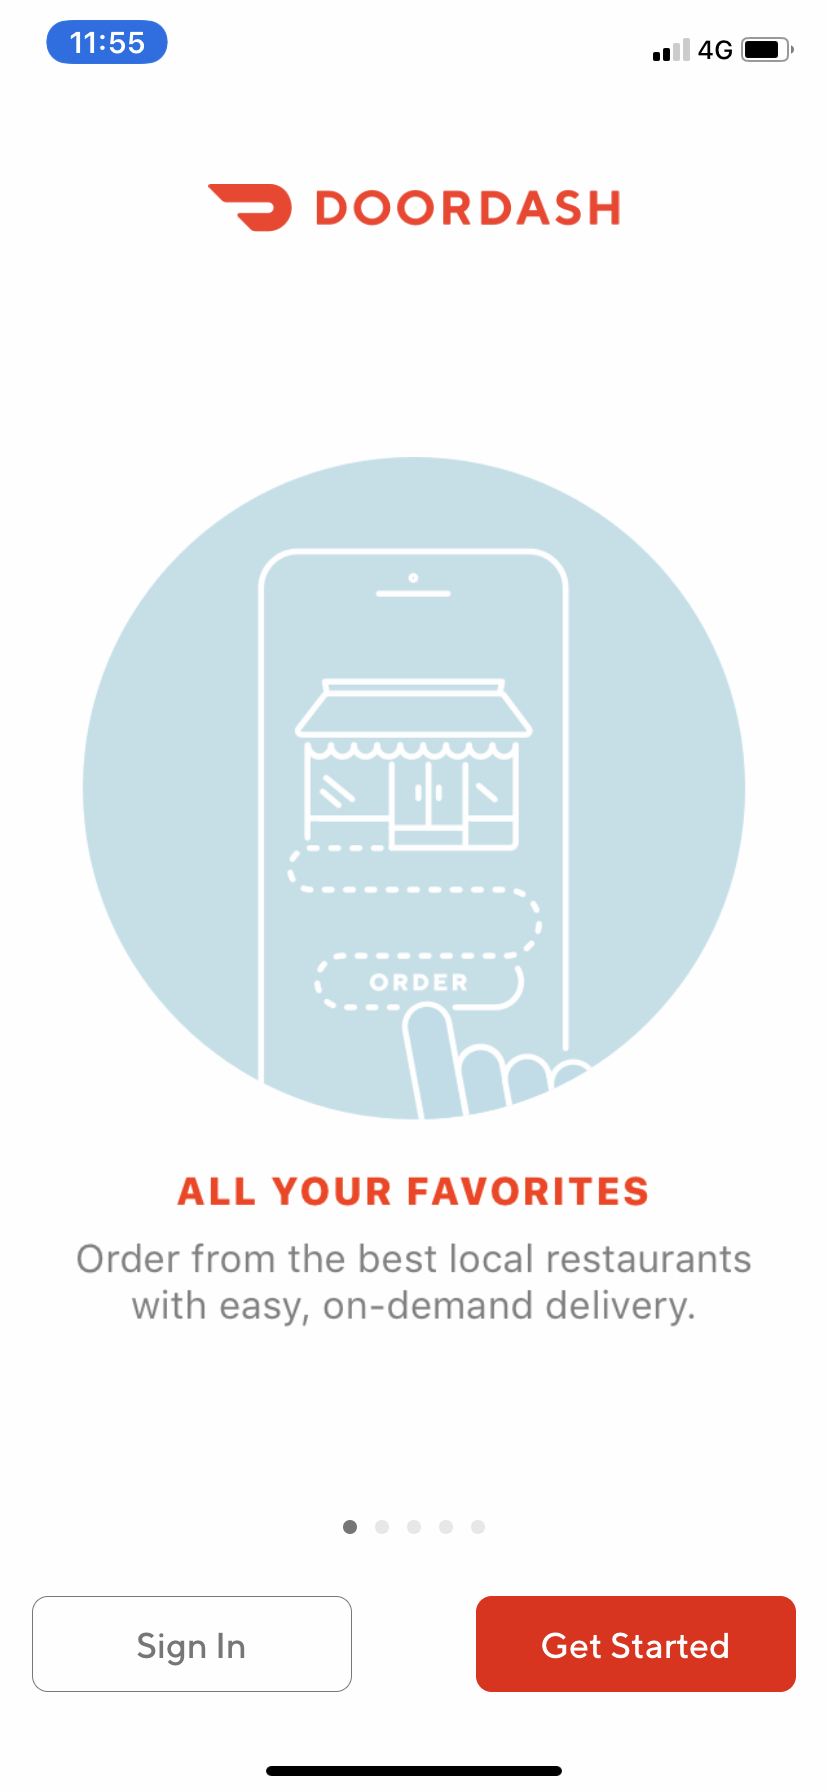 How To Use Doordash App to Order Food in 2021: How Does It Work? 